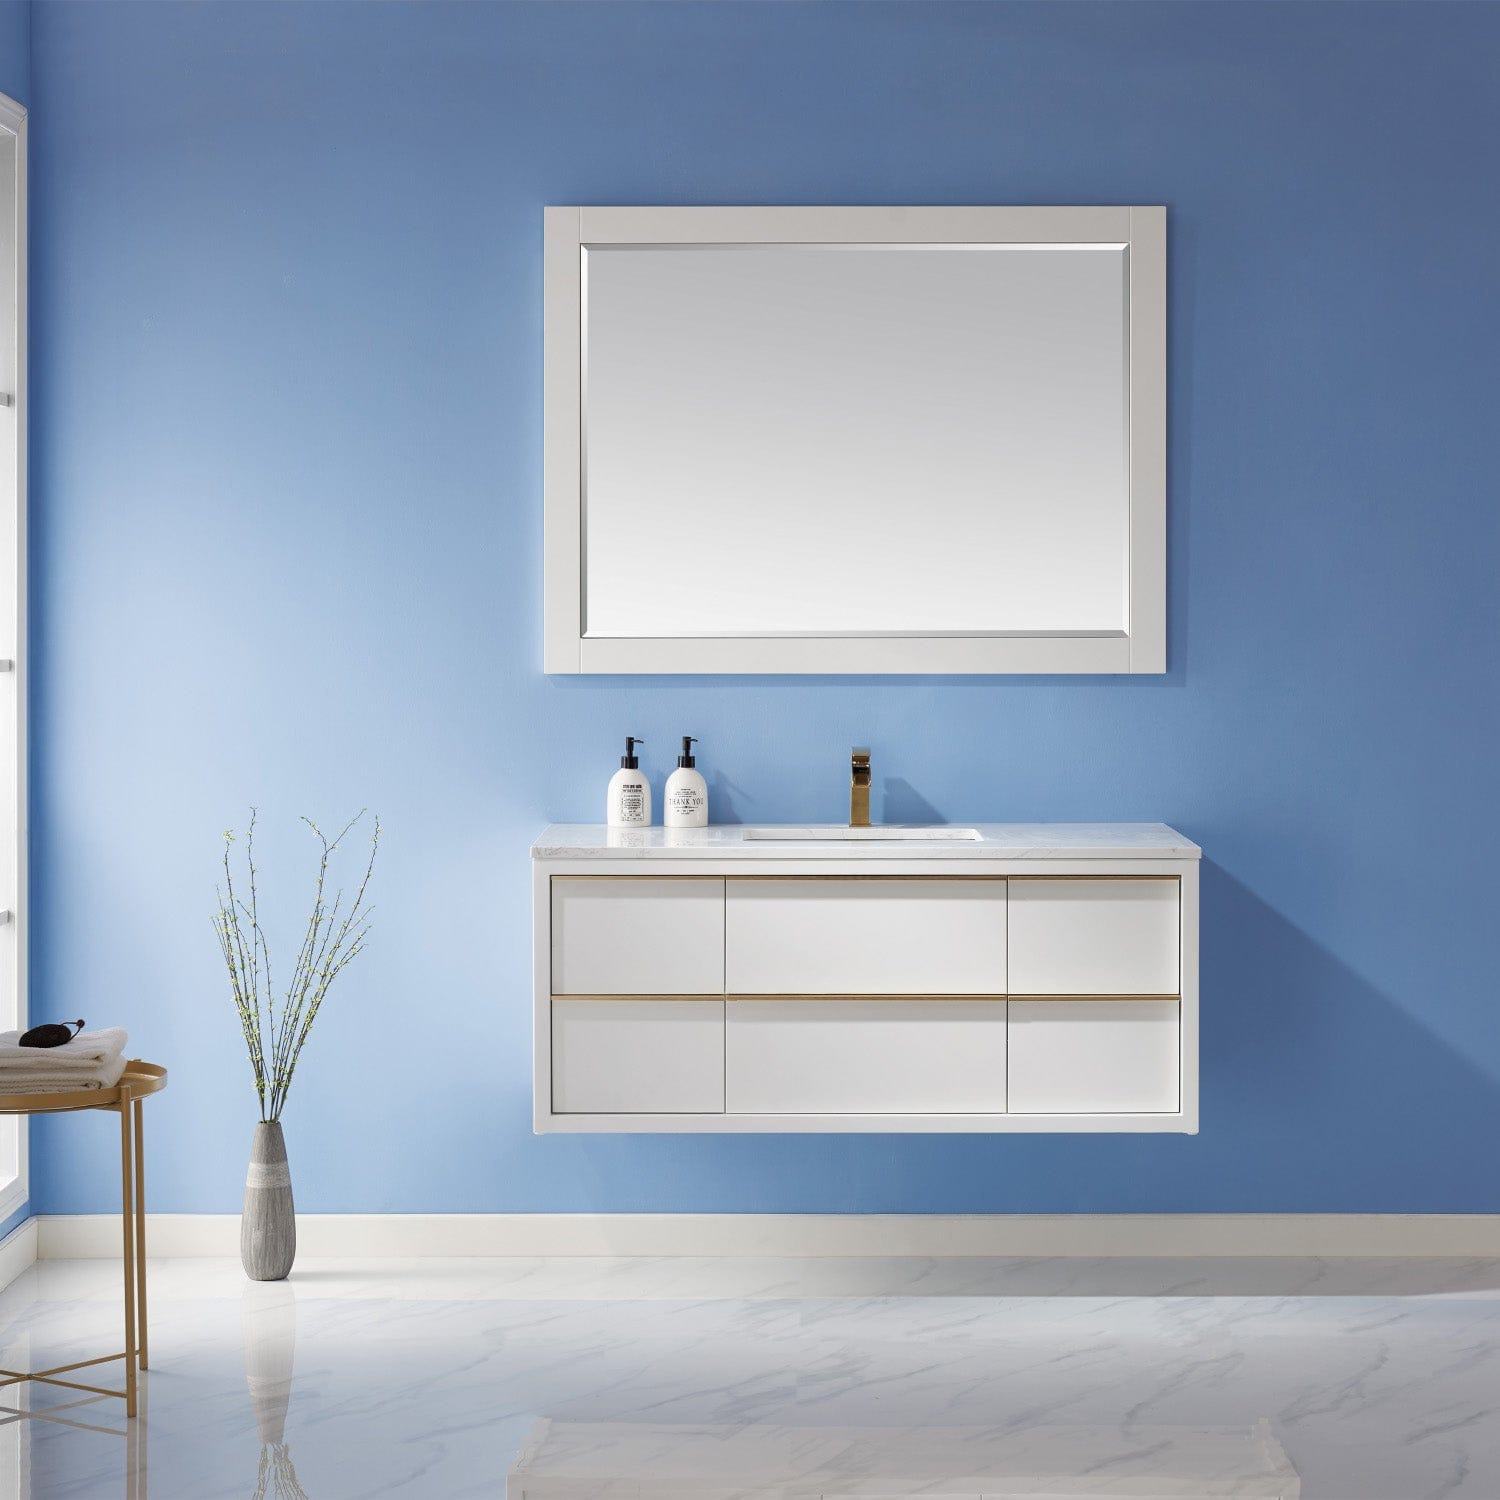 Altair Morgan 48" Single Bathroom Vanity Set in White and Composite Carrara White Stone Countertop with Mirror 534048-WH-AW - Molaix631112971775Vanity534048-WH-AW